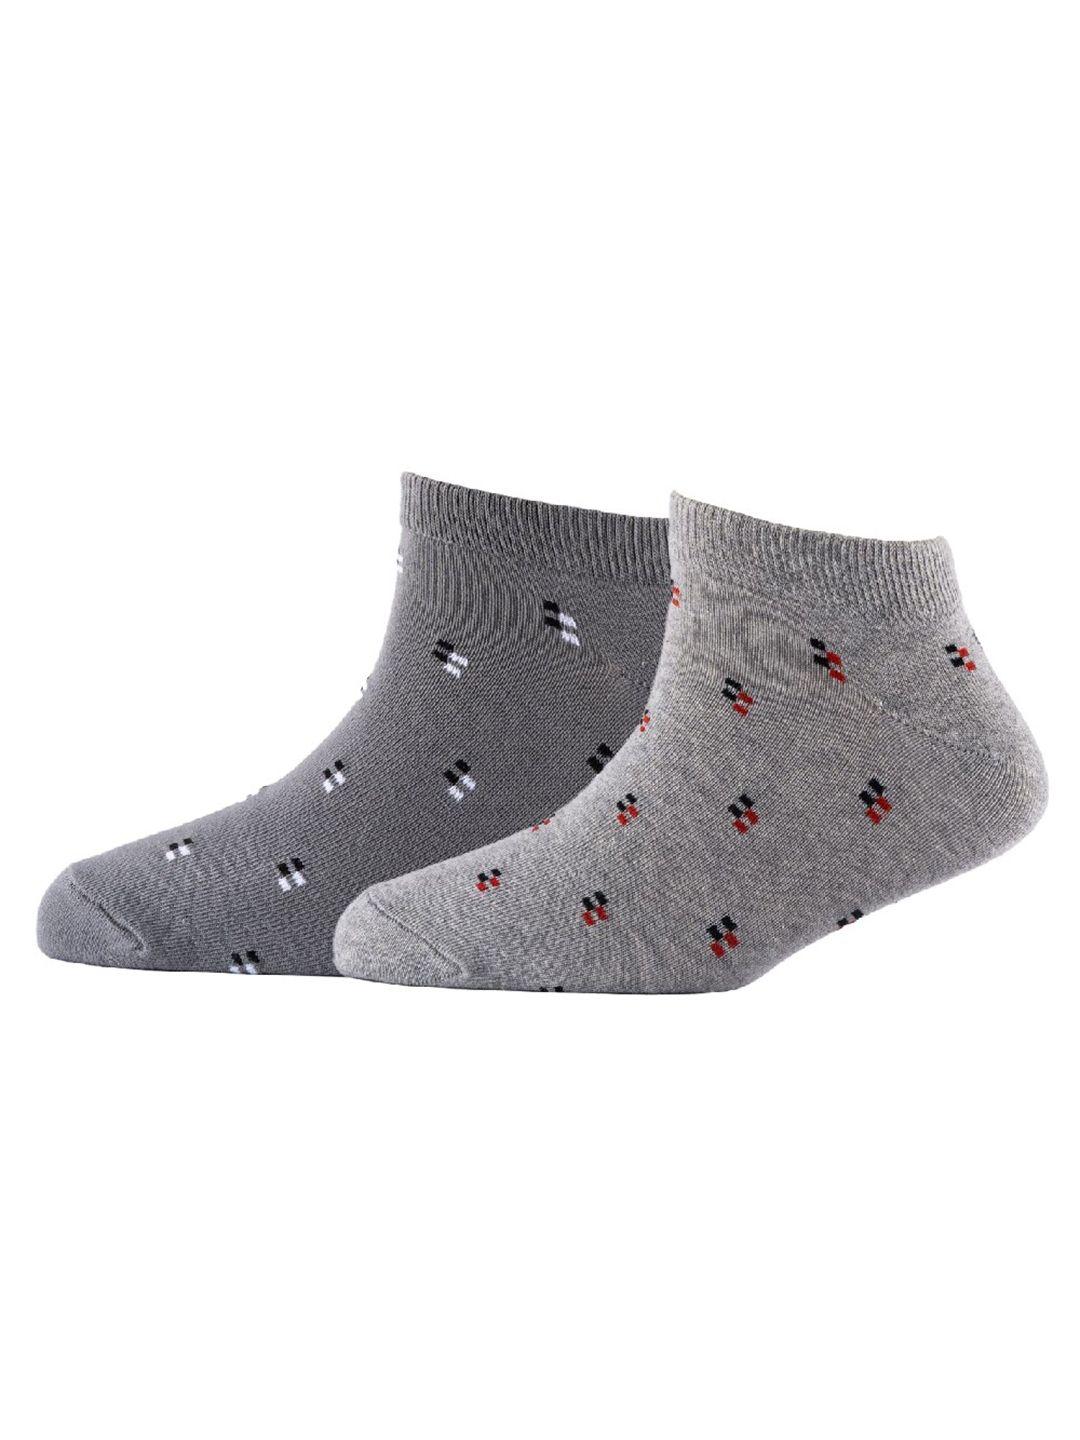 cotstyle-men-pack-of-2-patterned-cotton-ankle-length-socks